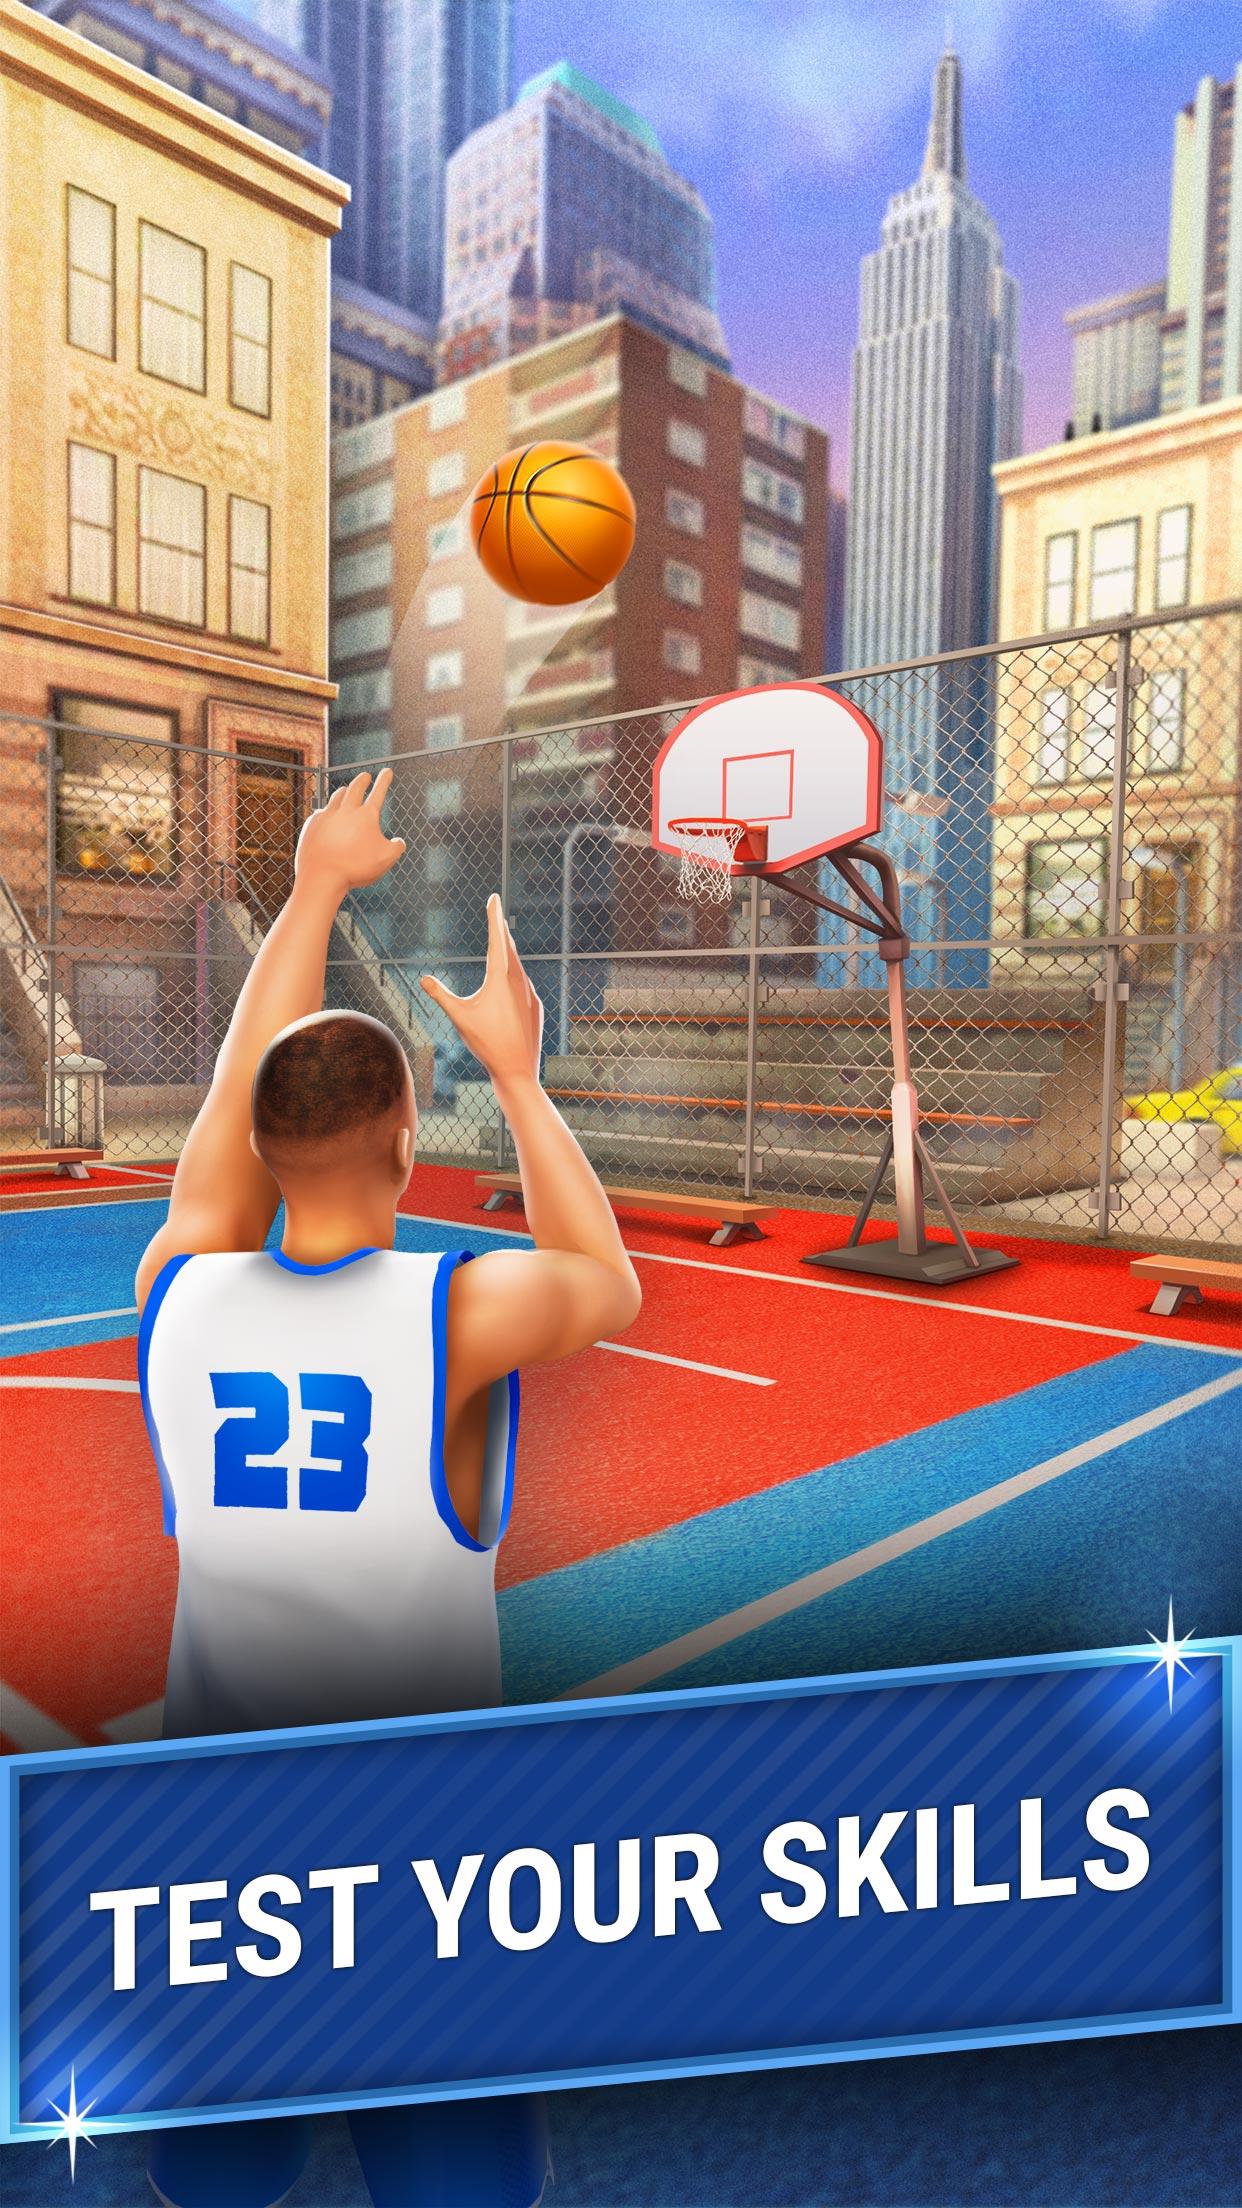 Shooting Hoops 3 Point Basketball Games For Android Apk Download - aimbot roblox hoops hoops 2019 05 07